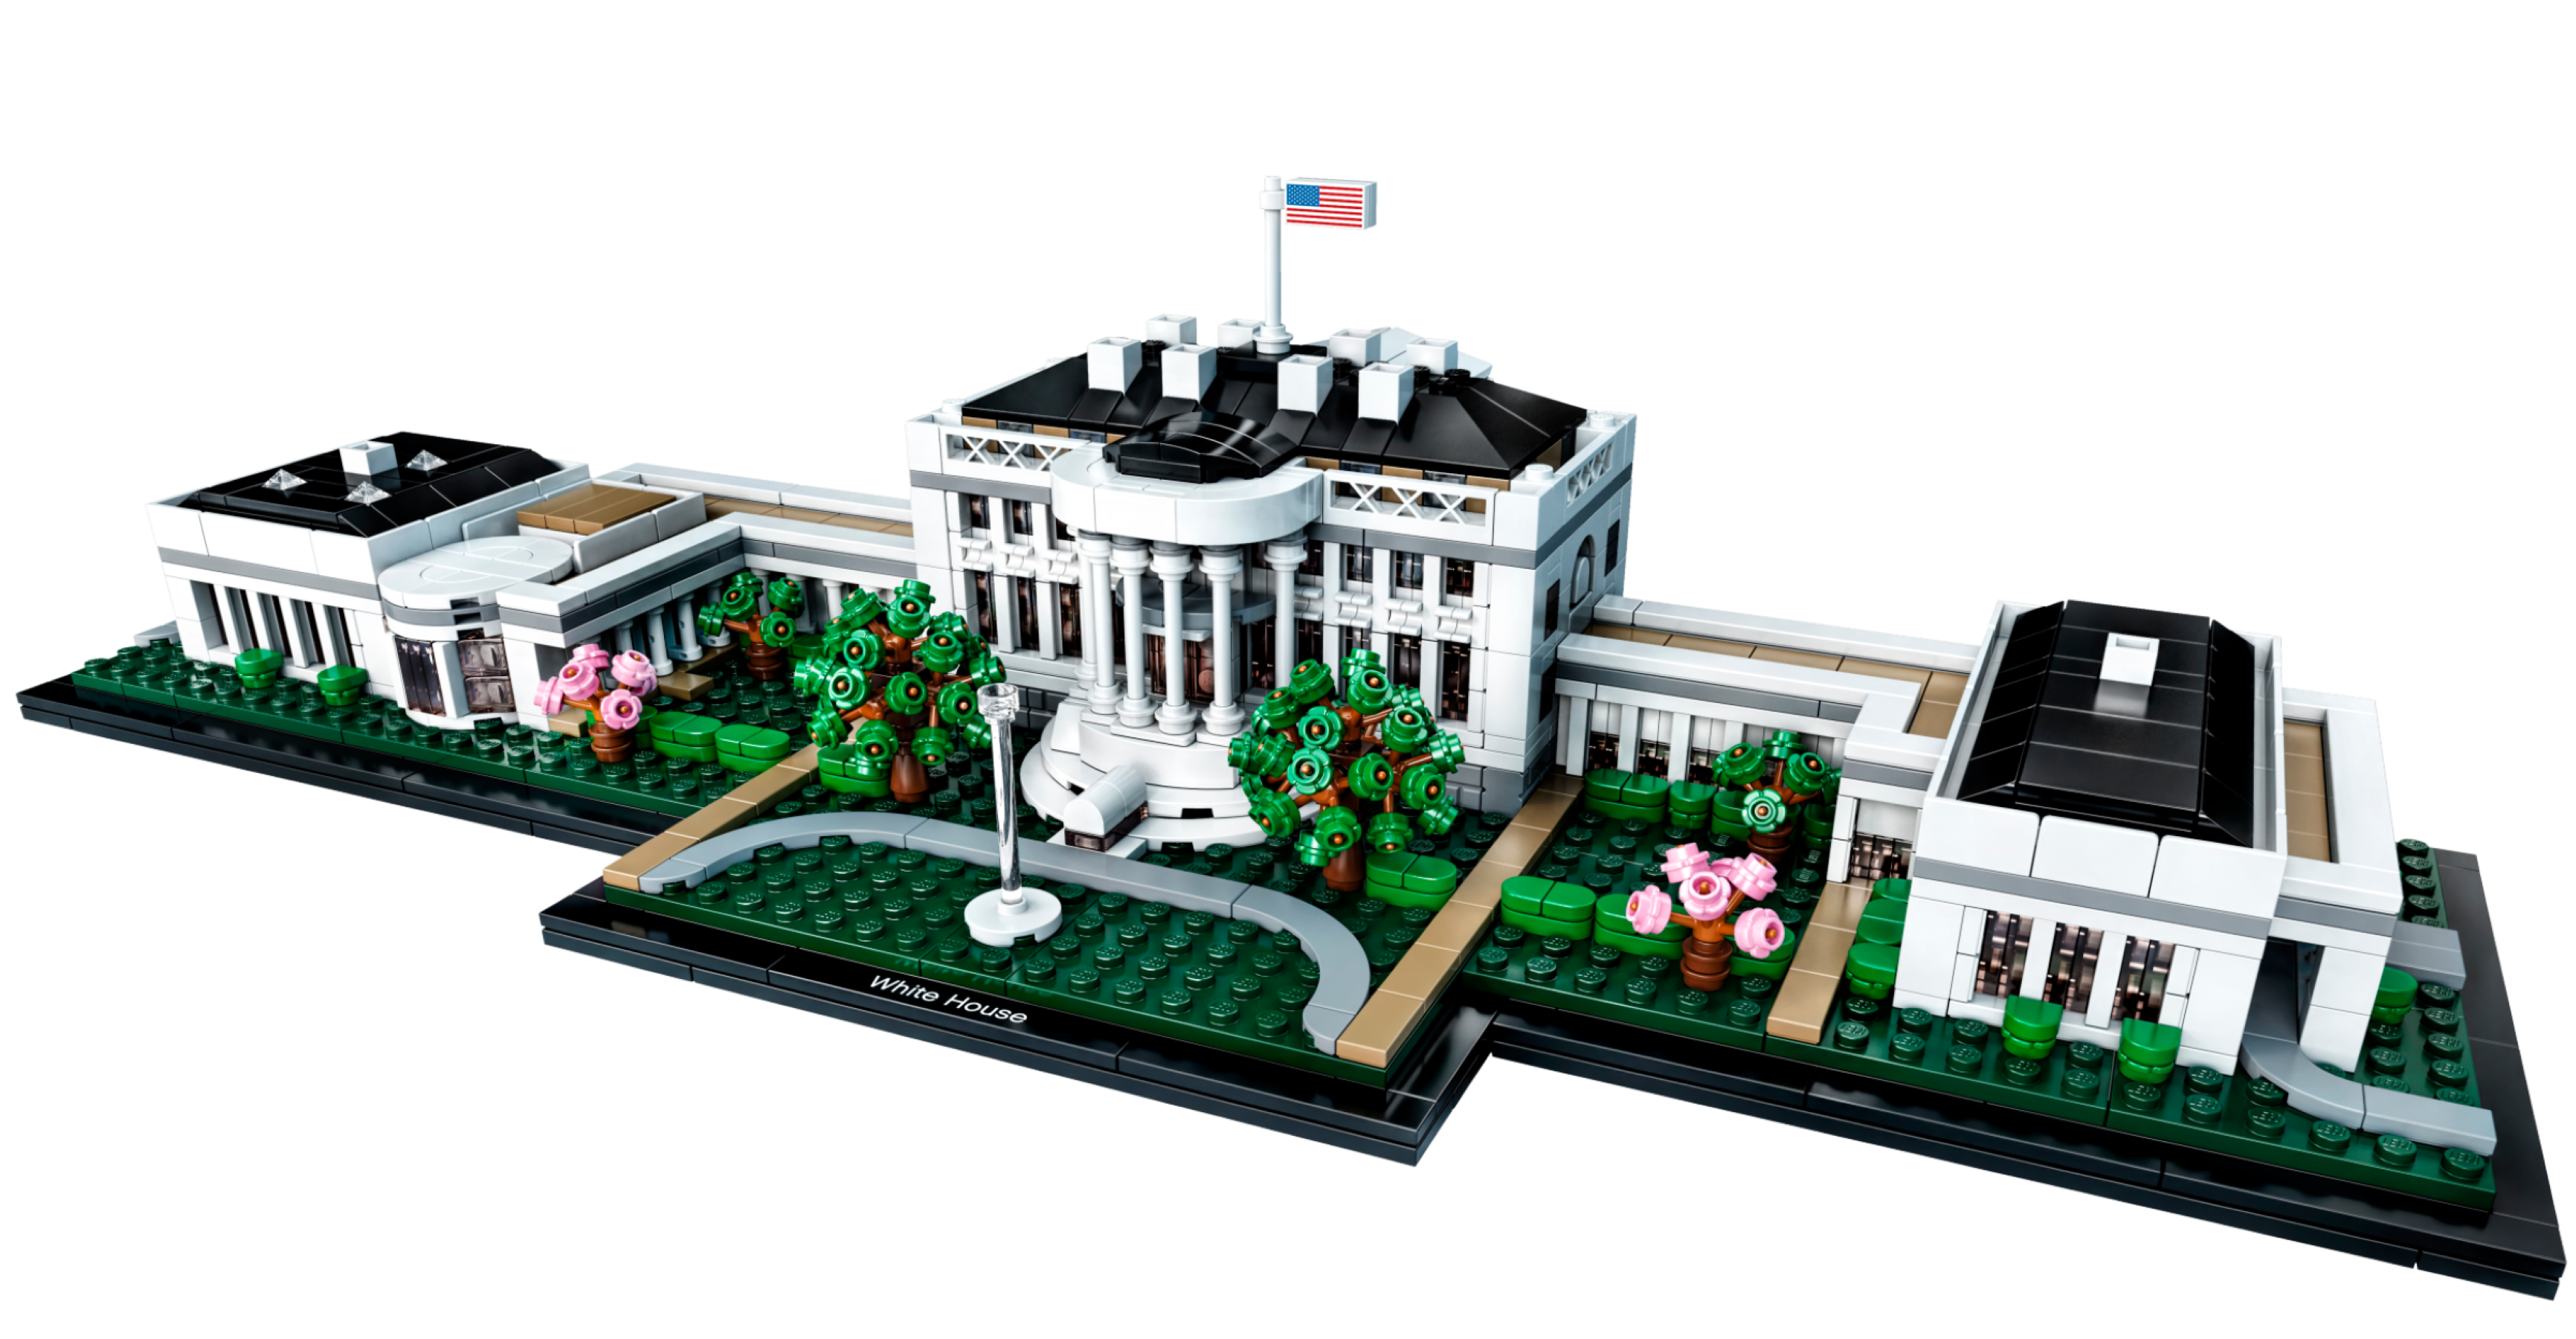 Stadion se Koncession The White House 21054 | Architecture | Buy online at the Official LEGO®  Shop US